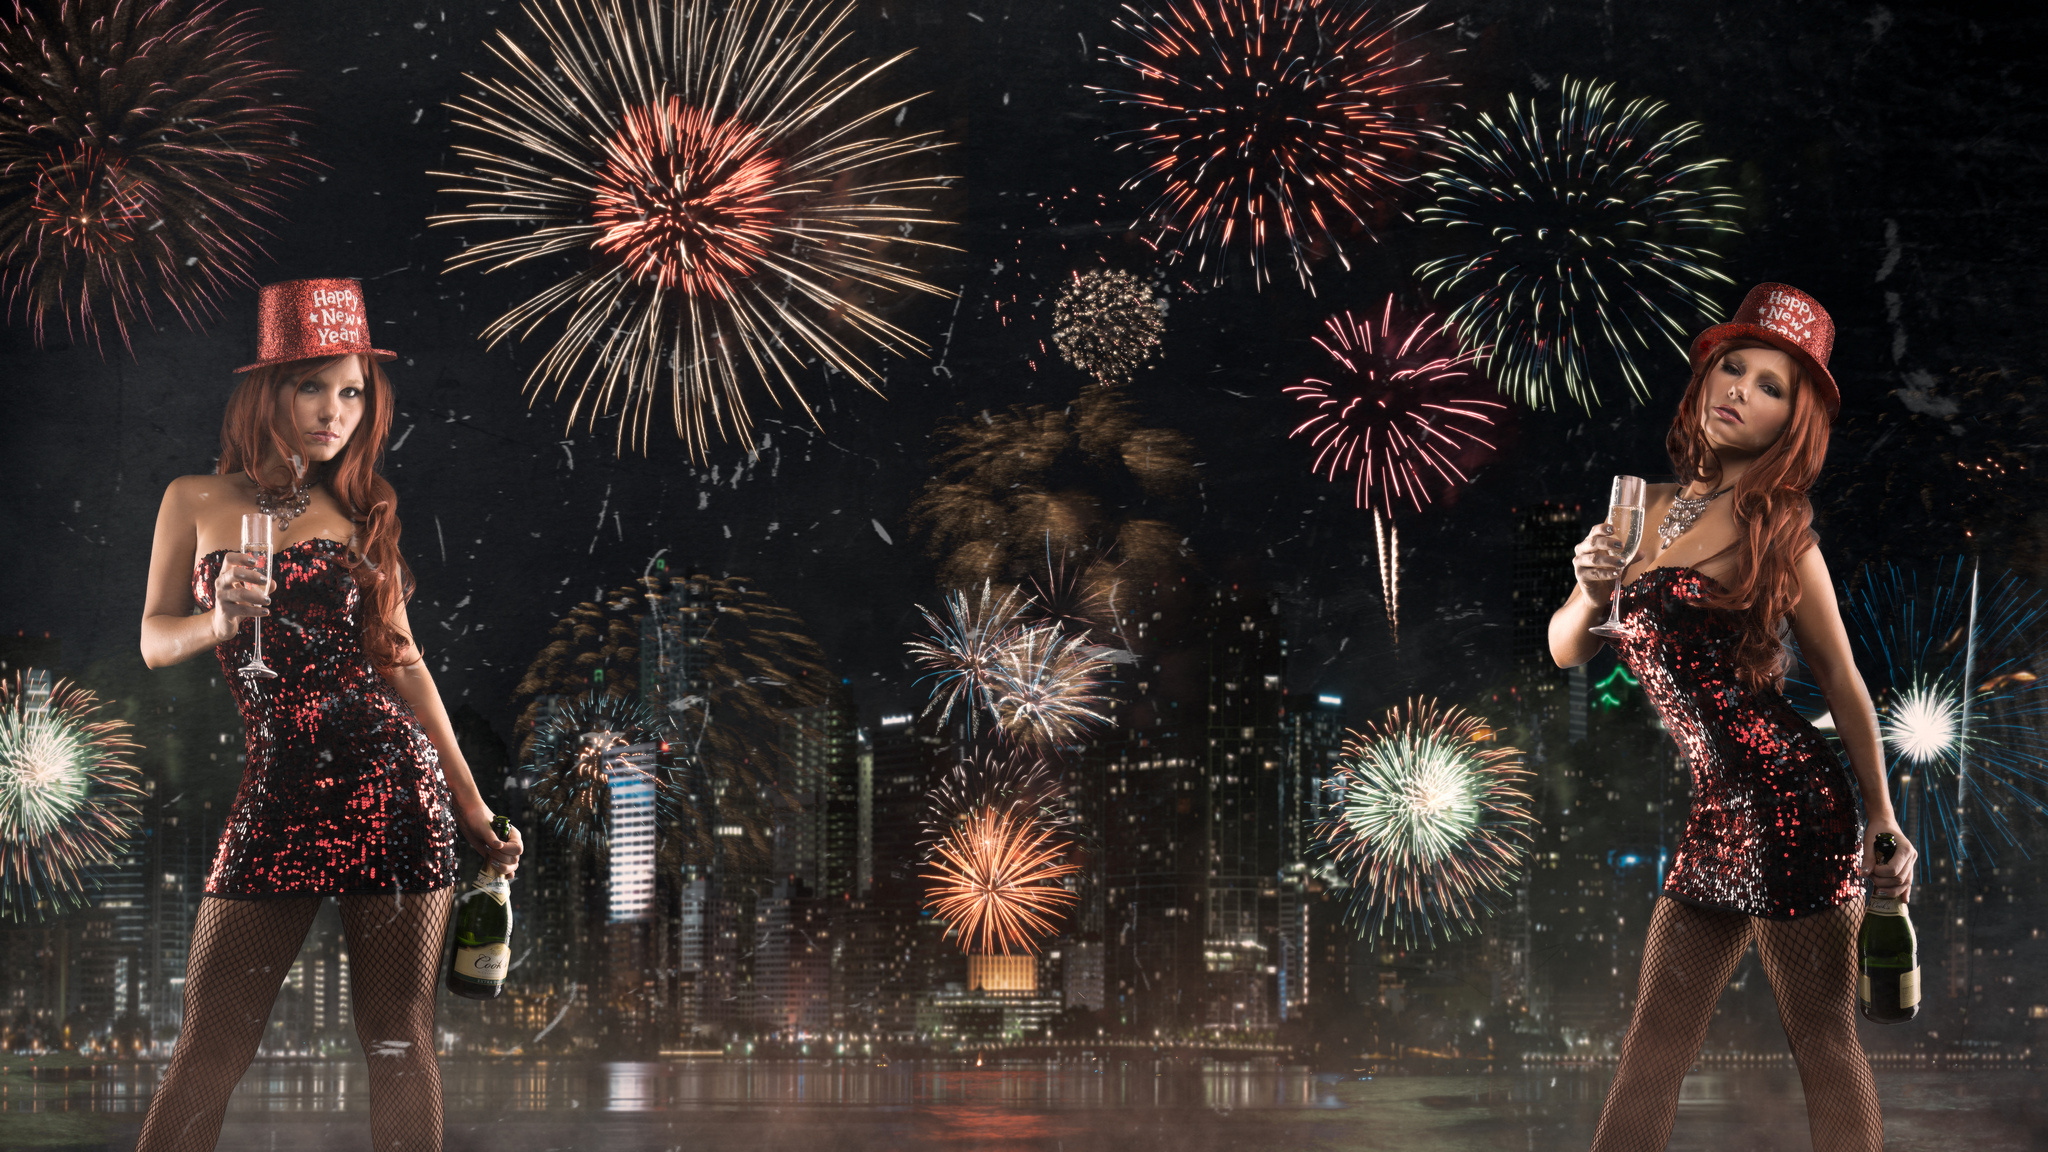 tancy, Marie, New Year, Fireworks, Night, City, A, Bottle, Of, Champagne Wallpaper